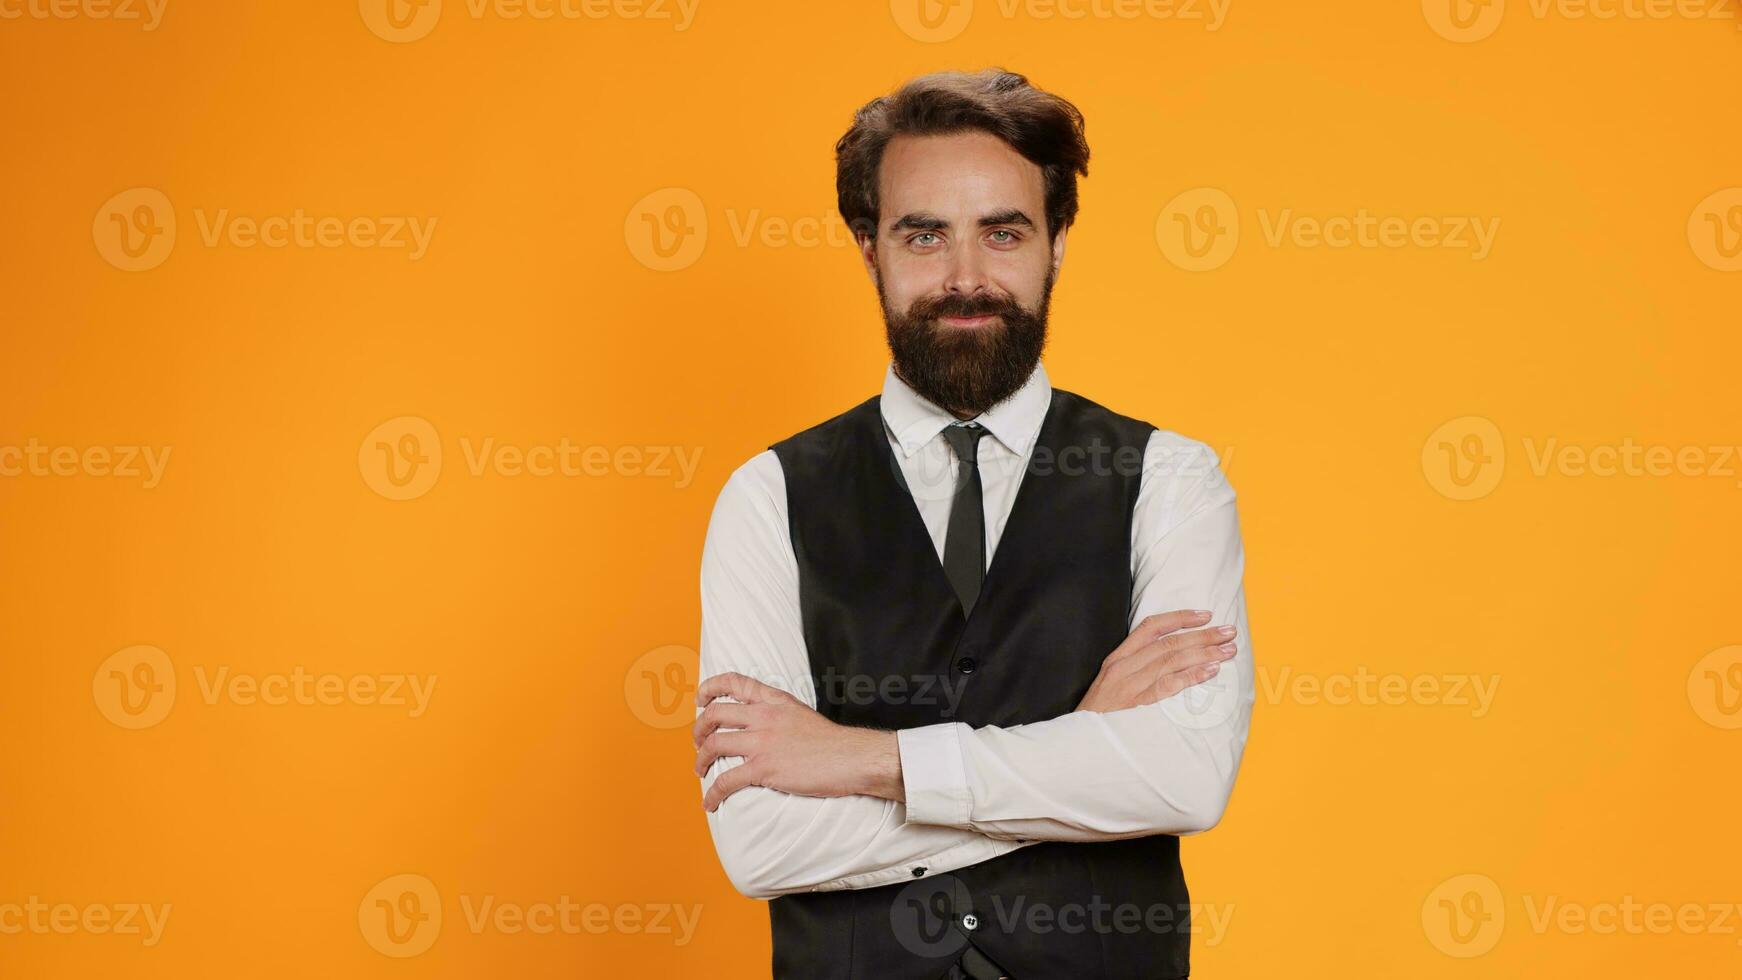 Before serving meal, elegant waiter poses with reliability in front of a yellow background in studio. Bearded server in suit operating in formal environment in the culinary sector. photo